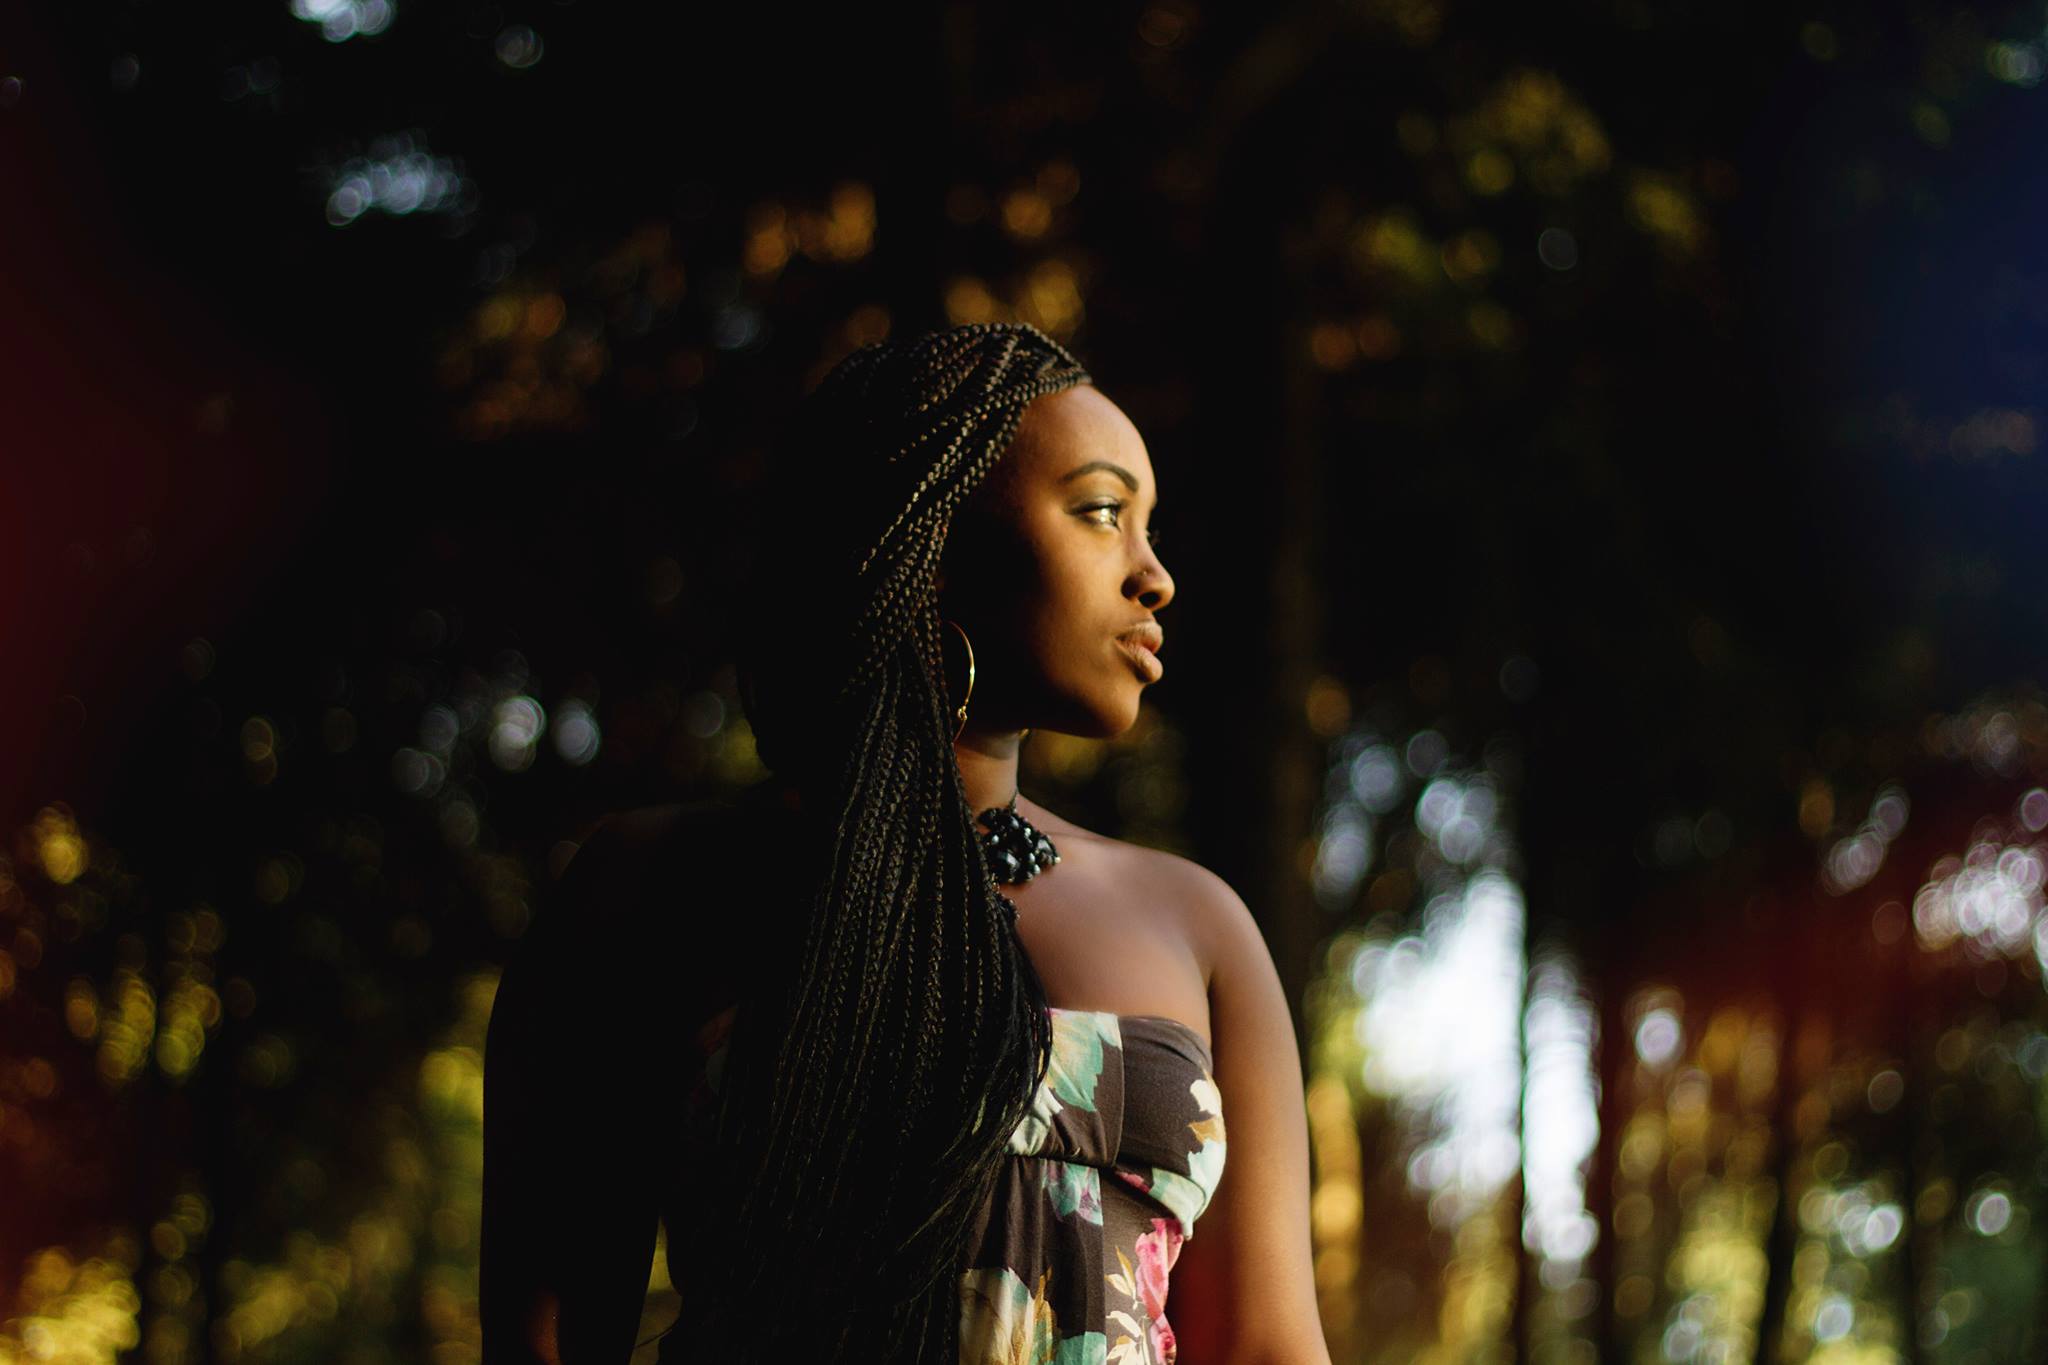 Hailing from Kenya, Mayonde is that songstress who, who has in recent years built a reputation around the uniqueness she holds in melodious vocals...